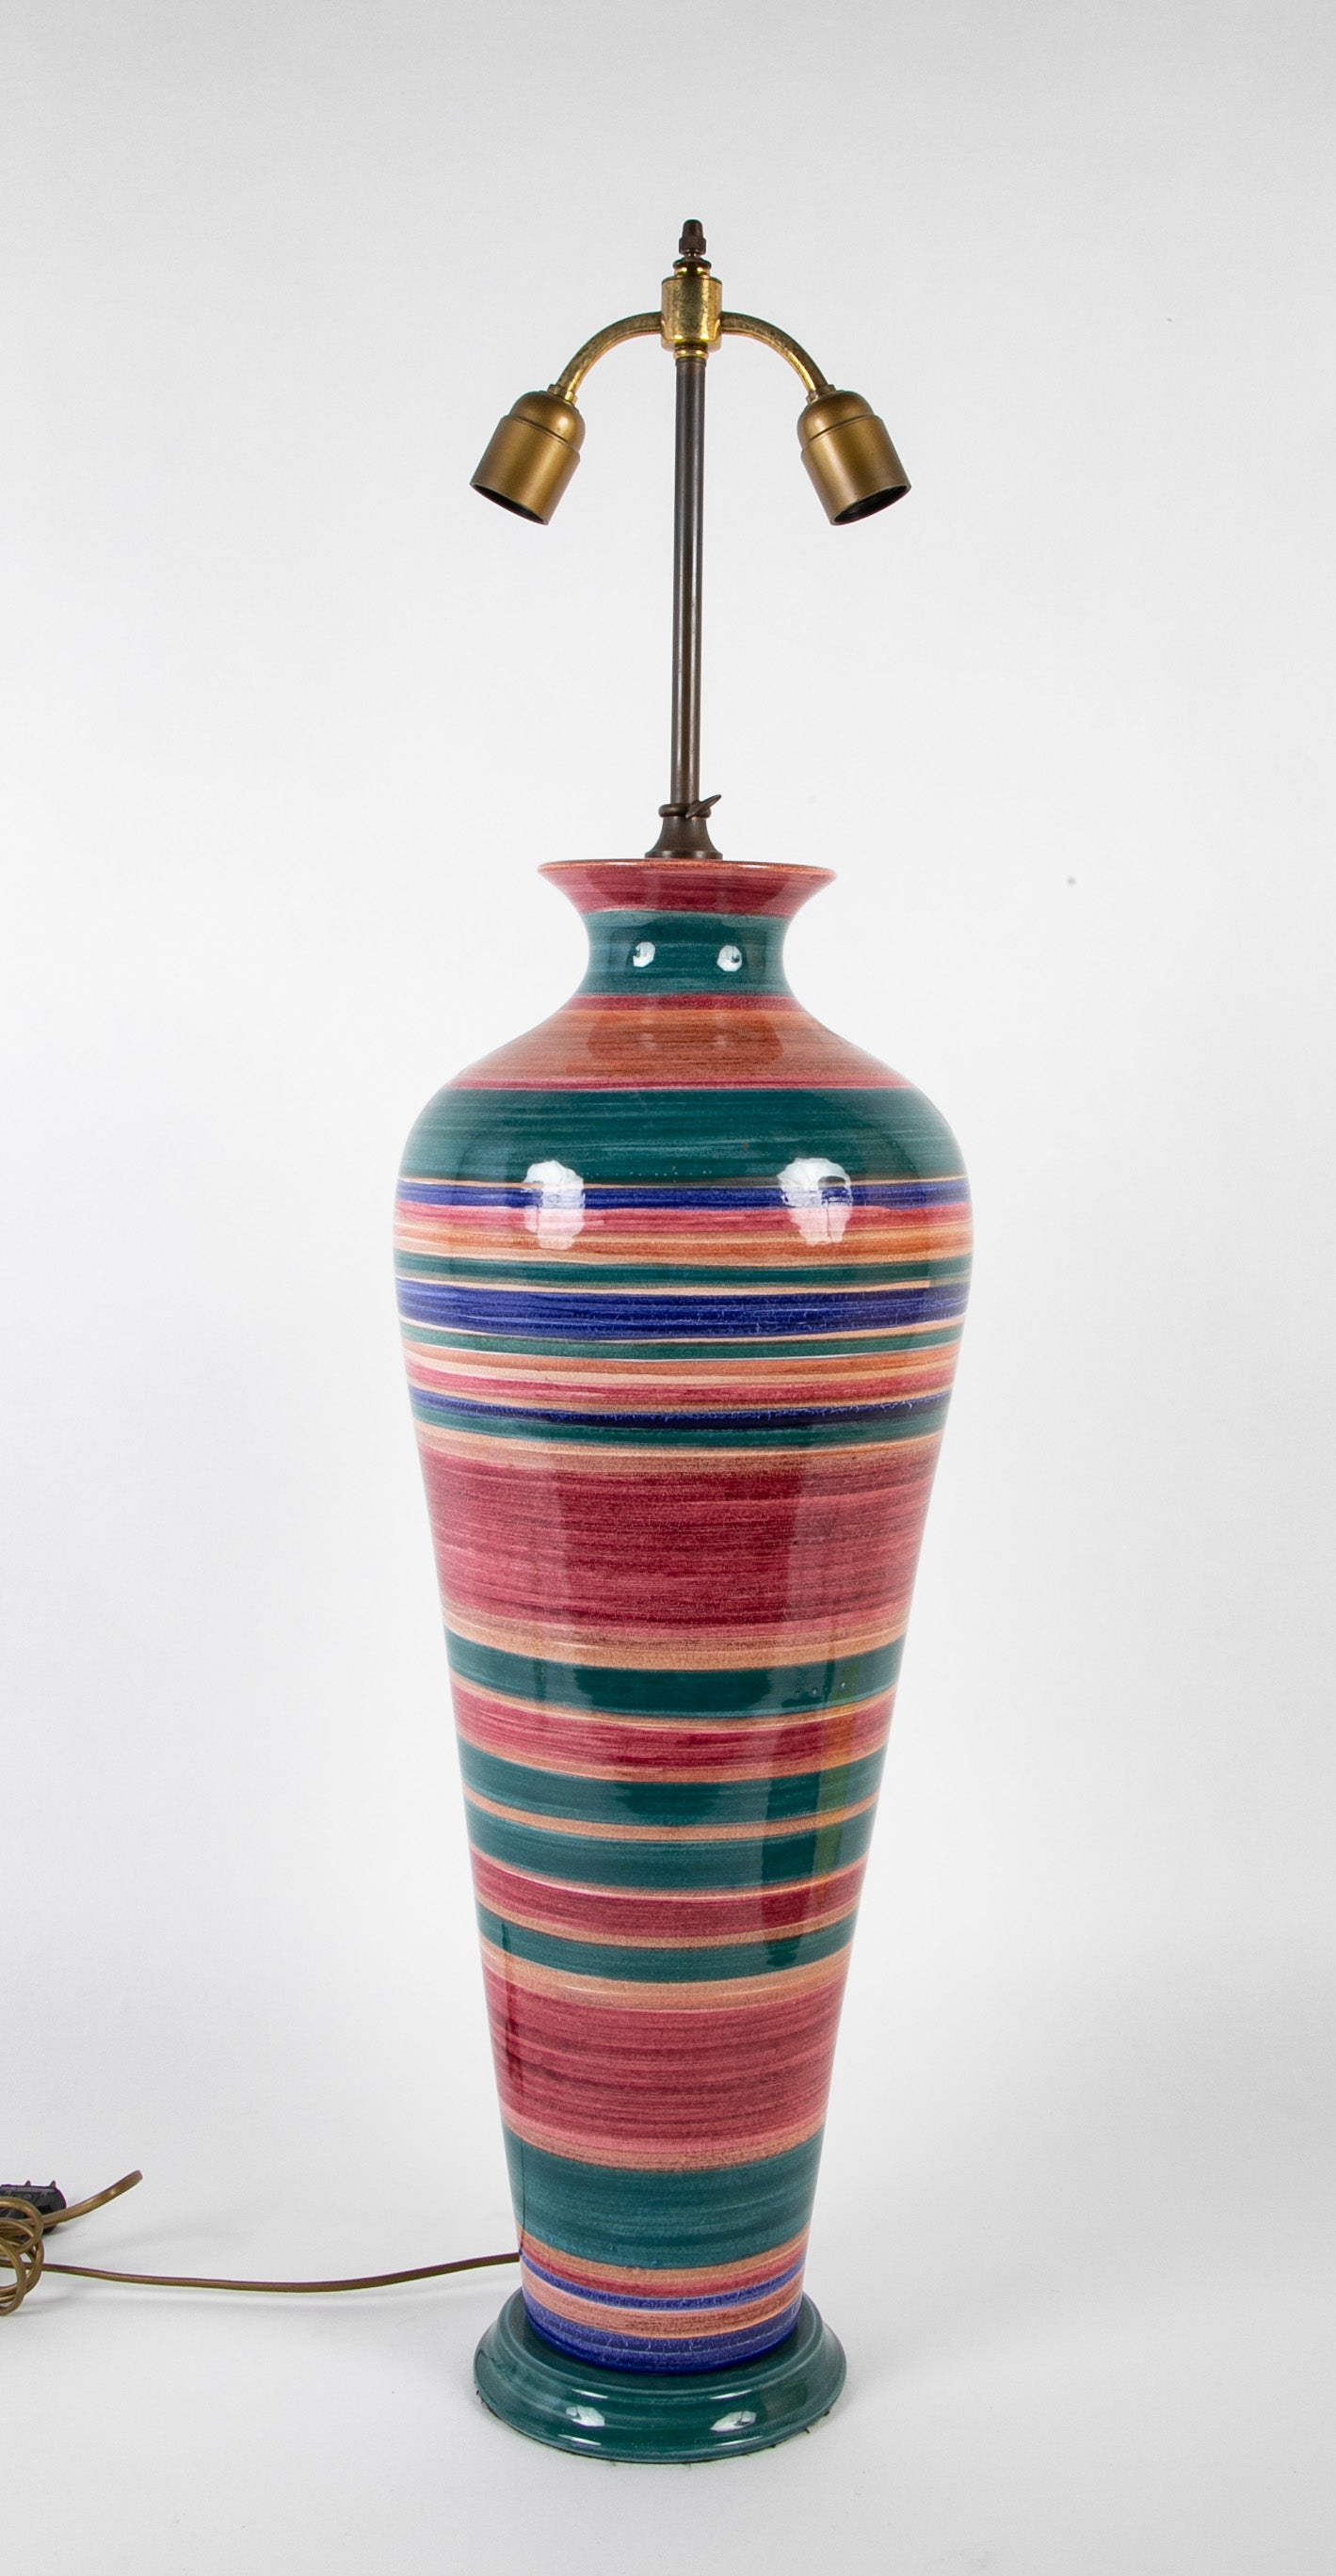 Colorful Vintage French Pottery Vase now a Lamp